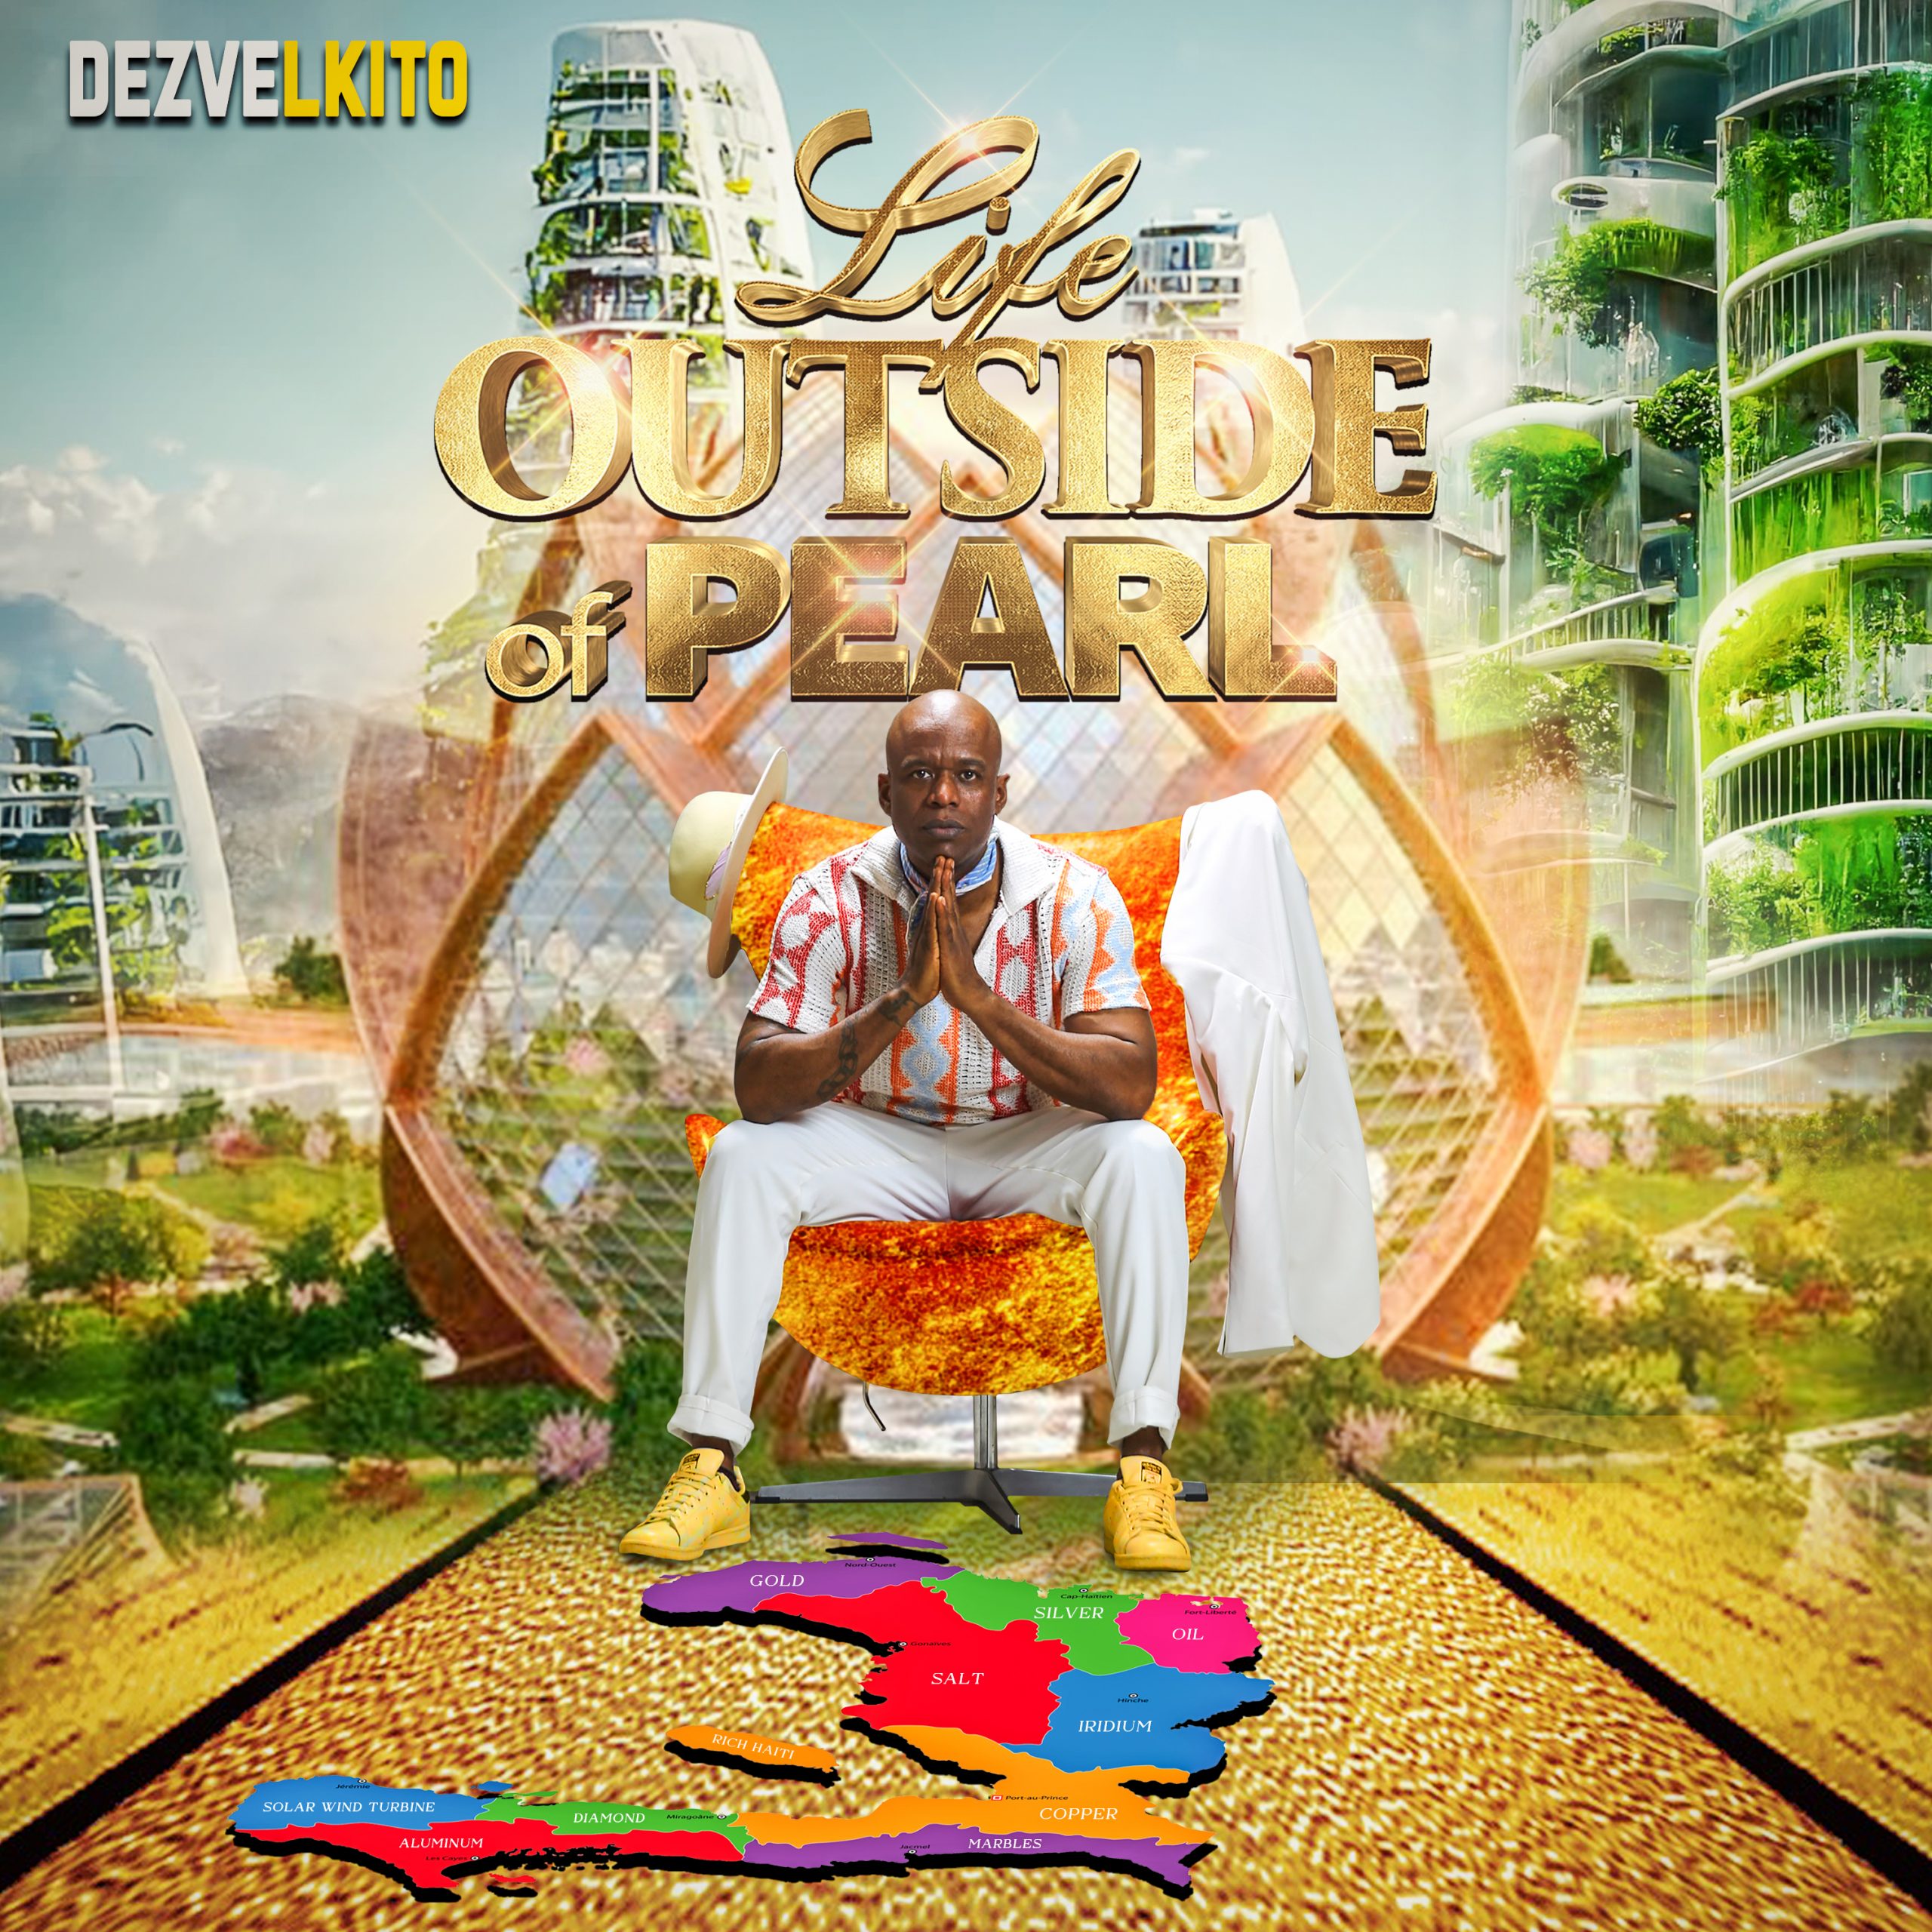 Pumping Bass and Cool Vocals: Dezvelkito’s “Life Outside of Pearl” on the playlist.